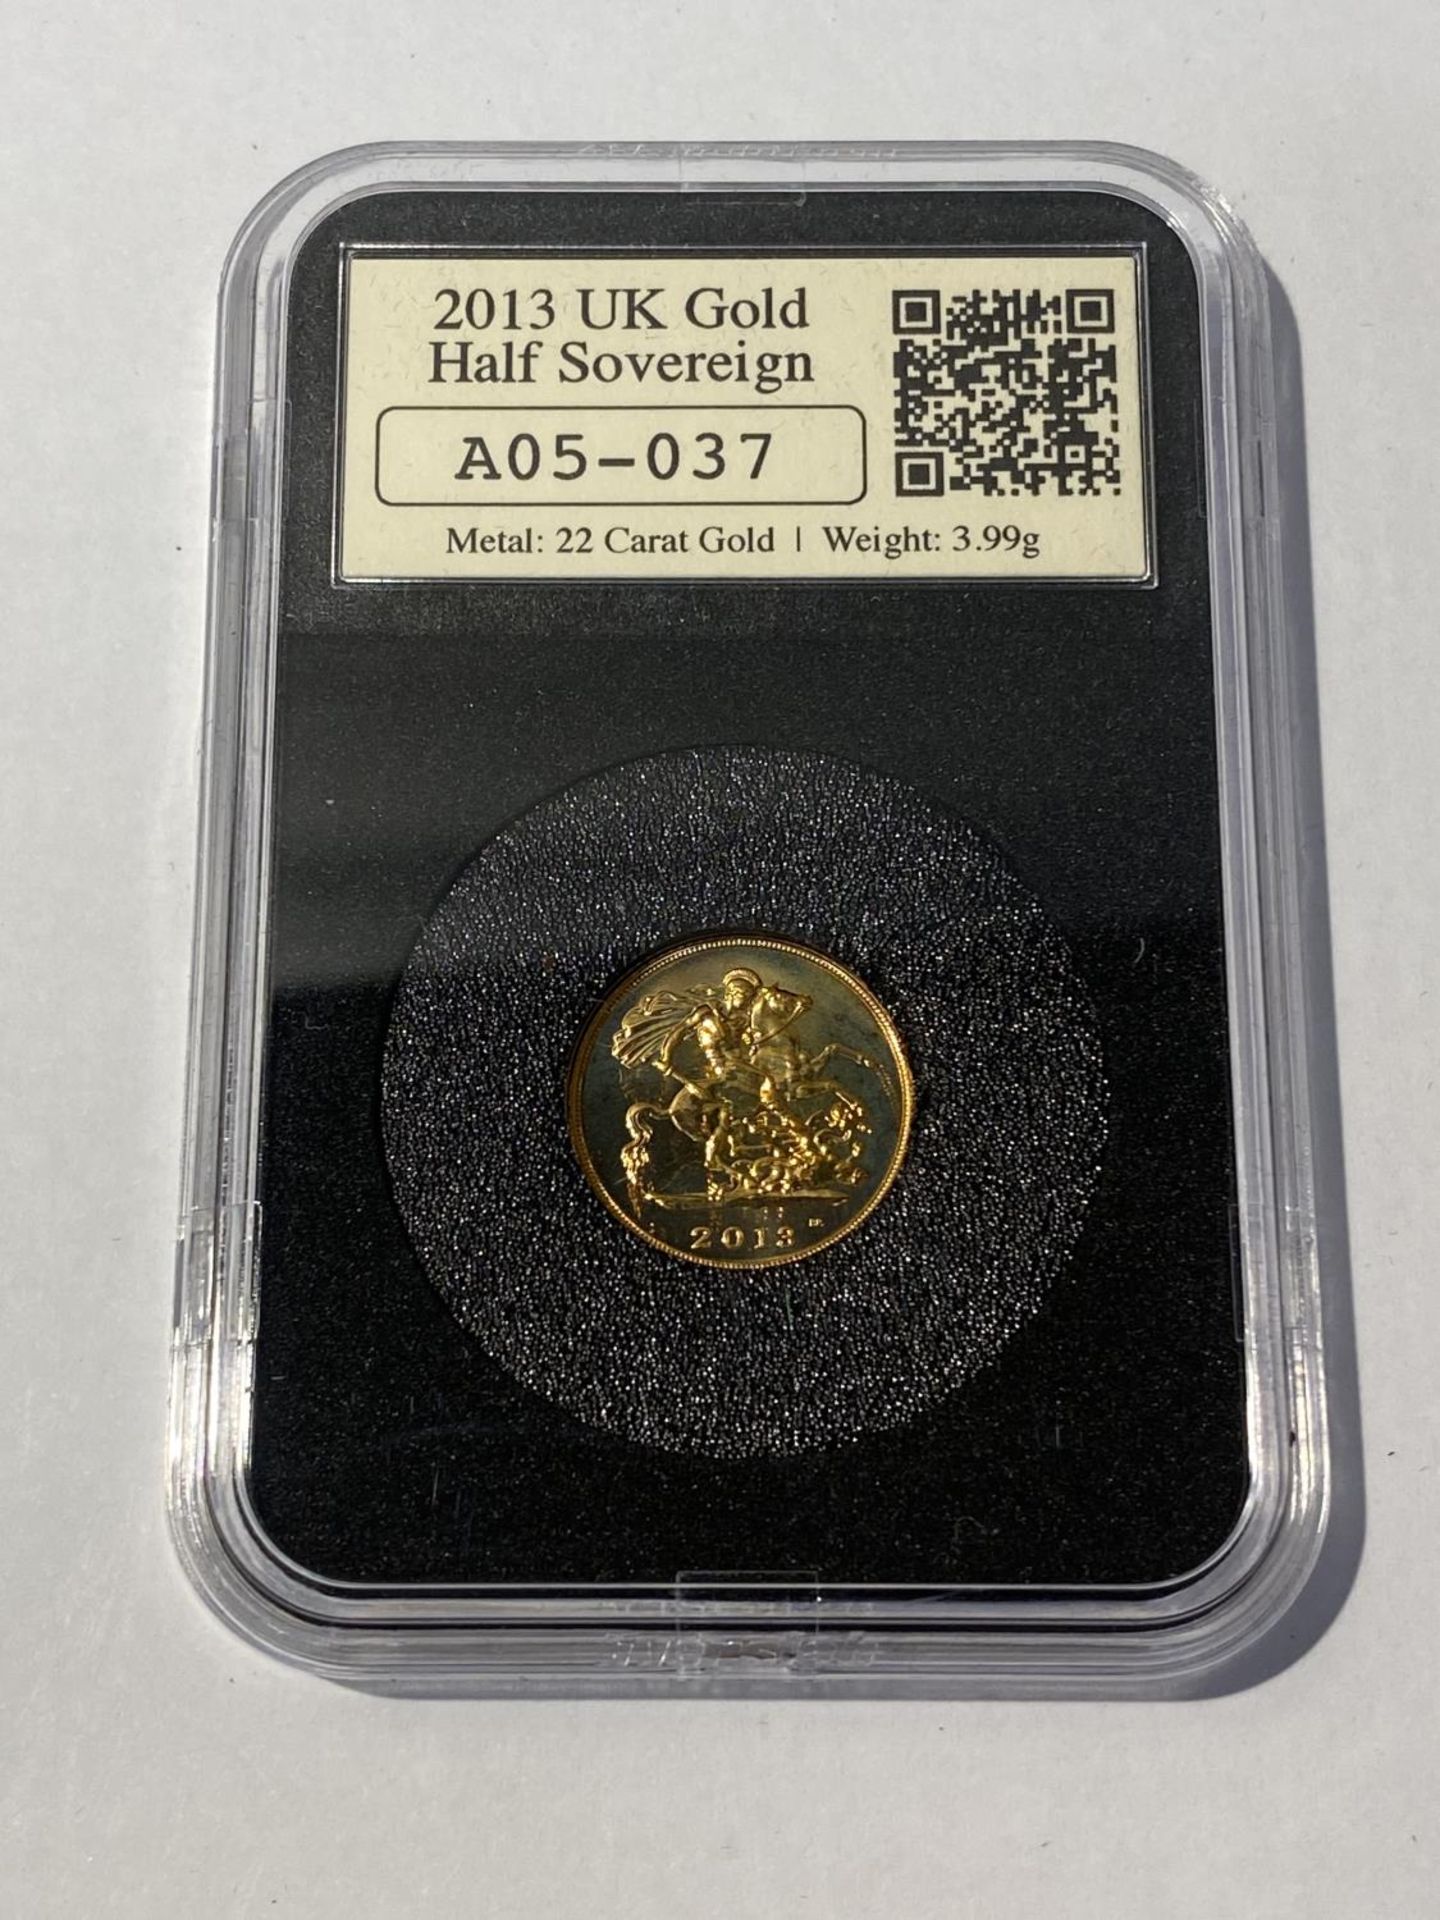 A UK GOLD SOVEREIGN, HALF SOVEREIGN AND QUARTER SOVEREIGN, QUEEN ELIZABETH 11, 2013, NEATLY - Image 3 of 6